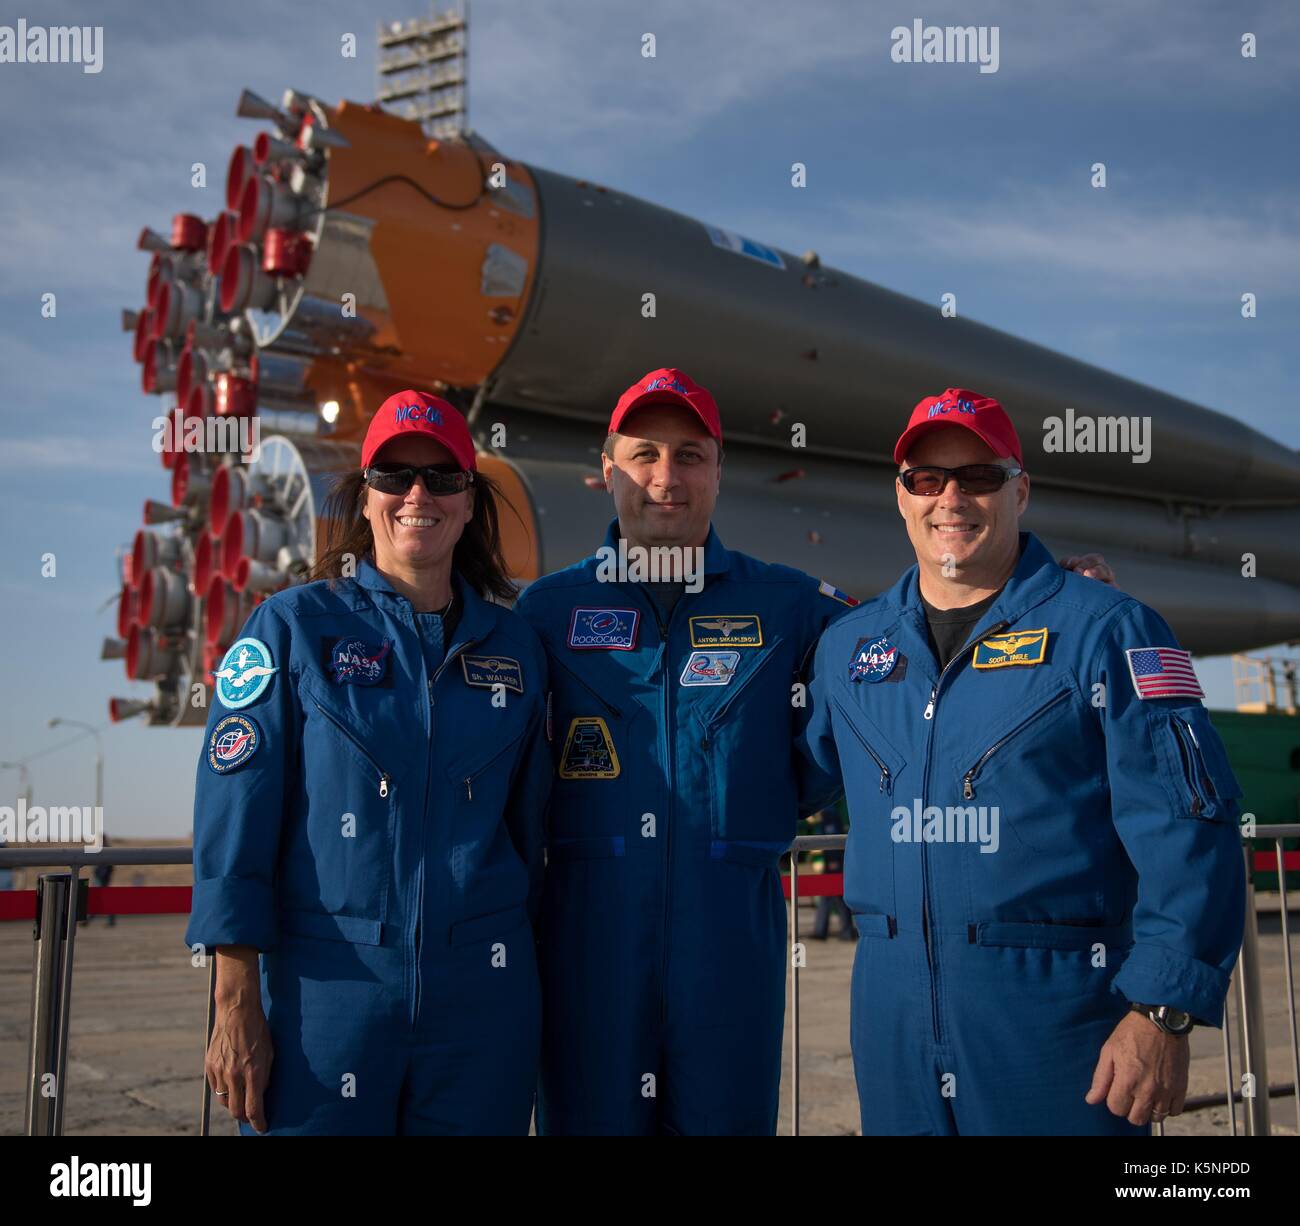 International Space Station Expedition 53 backup crew members Shannon Walker of NASA, left, Anton Shkaplerov of Roscosmos, and Scott Tingle of NASA, right, pose for a group photograph as the Soyuz rocket is rolled out by train to the launch pad at the Baikonur Cosmodrome September 10, 2017 in Baikonur, Kazakhstan. International Space Station Expedition 53 prime crew American astronaut Mark Vande Hei of NASA, Soyuz Commander Alexander Misurkin of Roscosmos, and American astronaut Joe Acaba of NASA will launch aboard the rocket on September 13th. Stock Photo